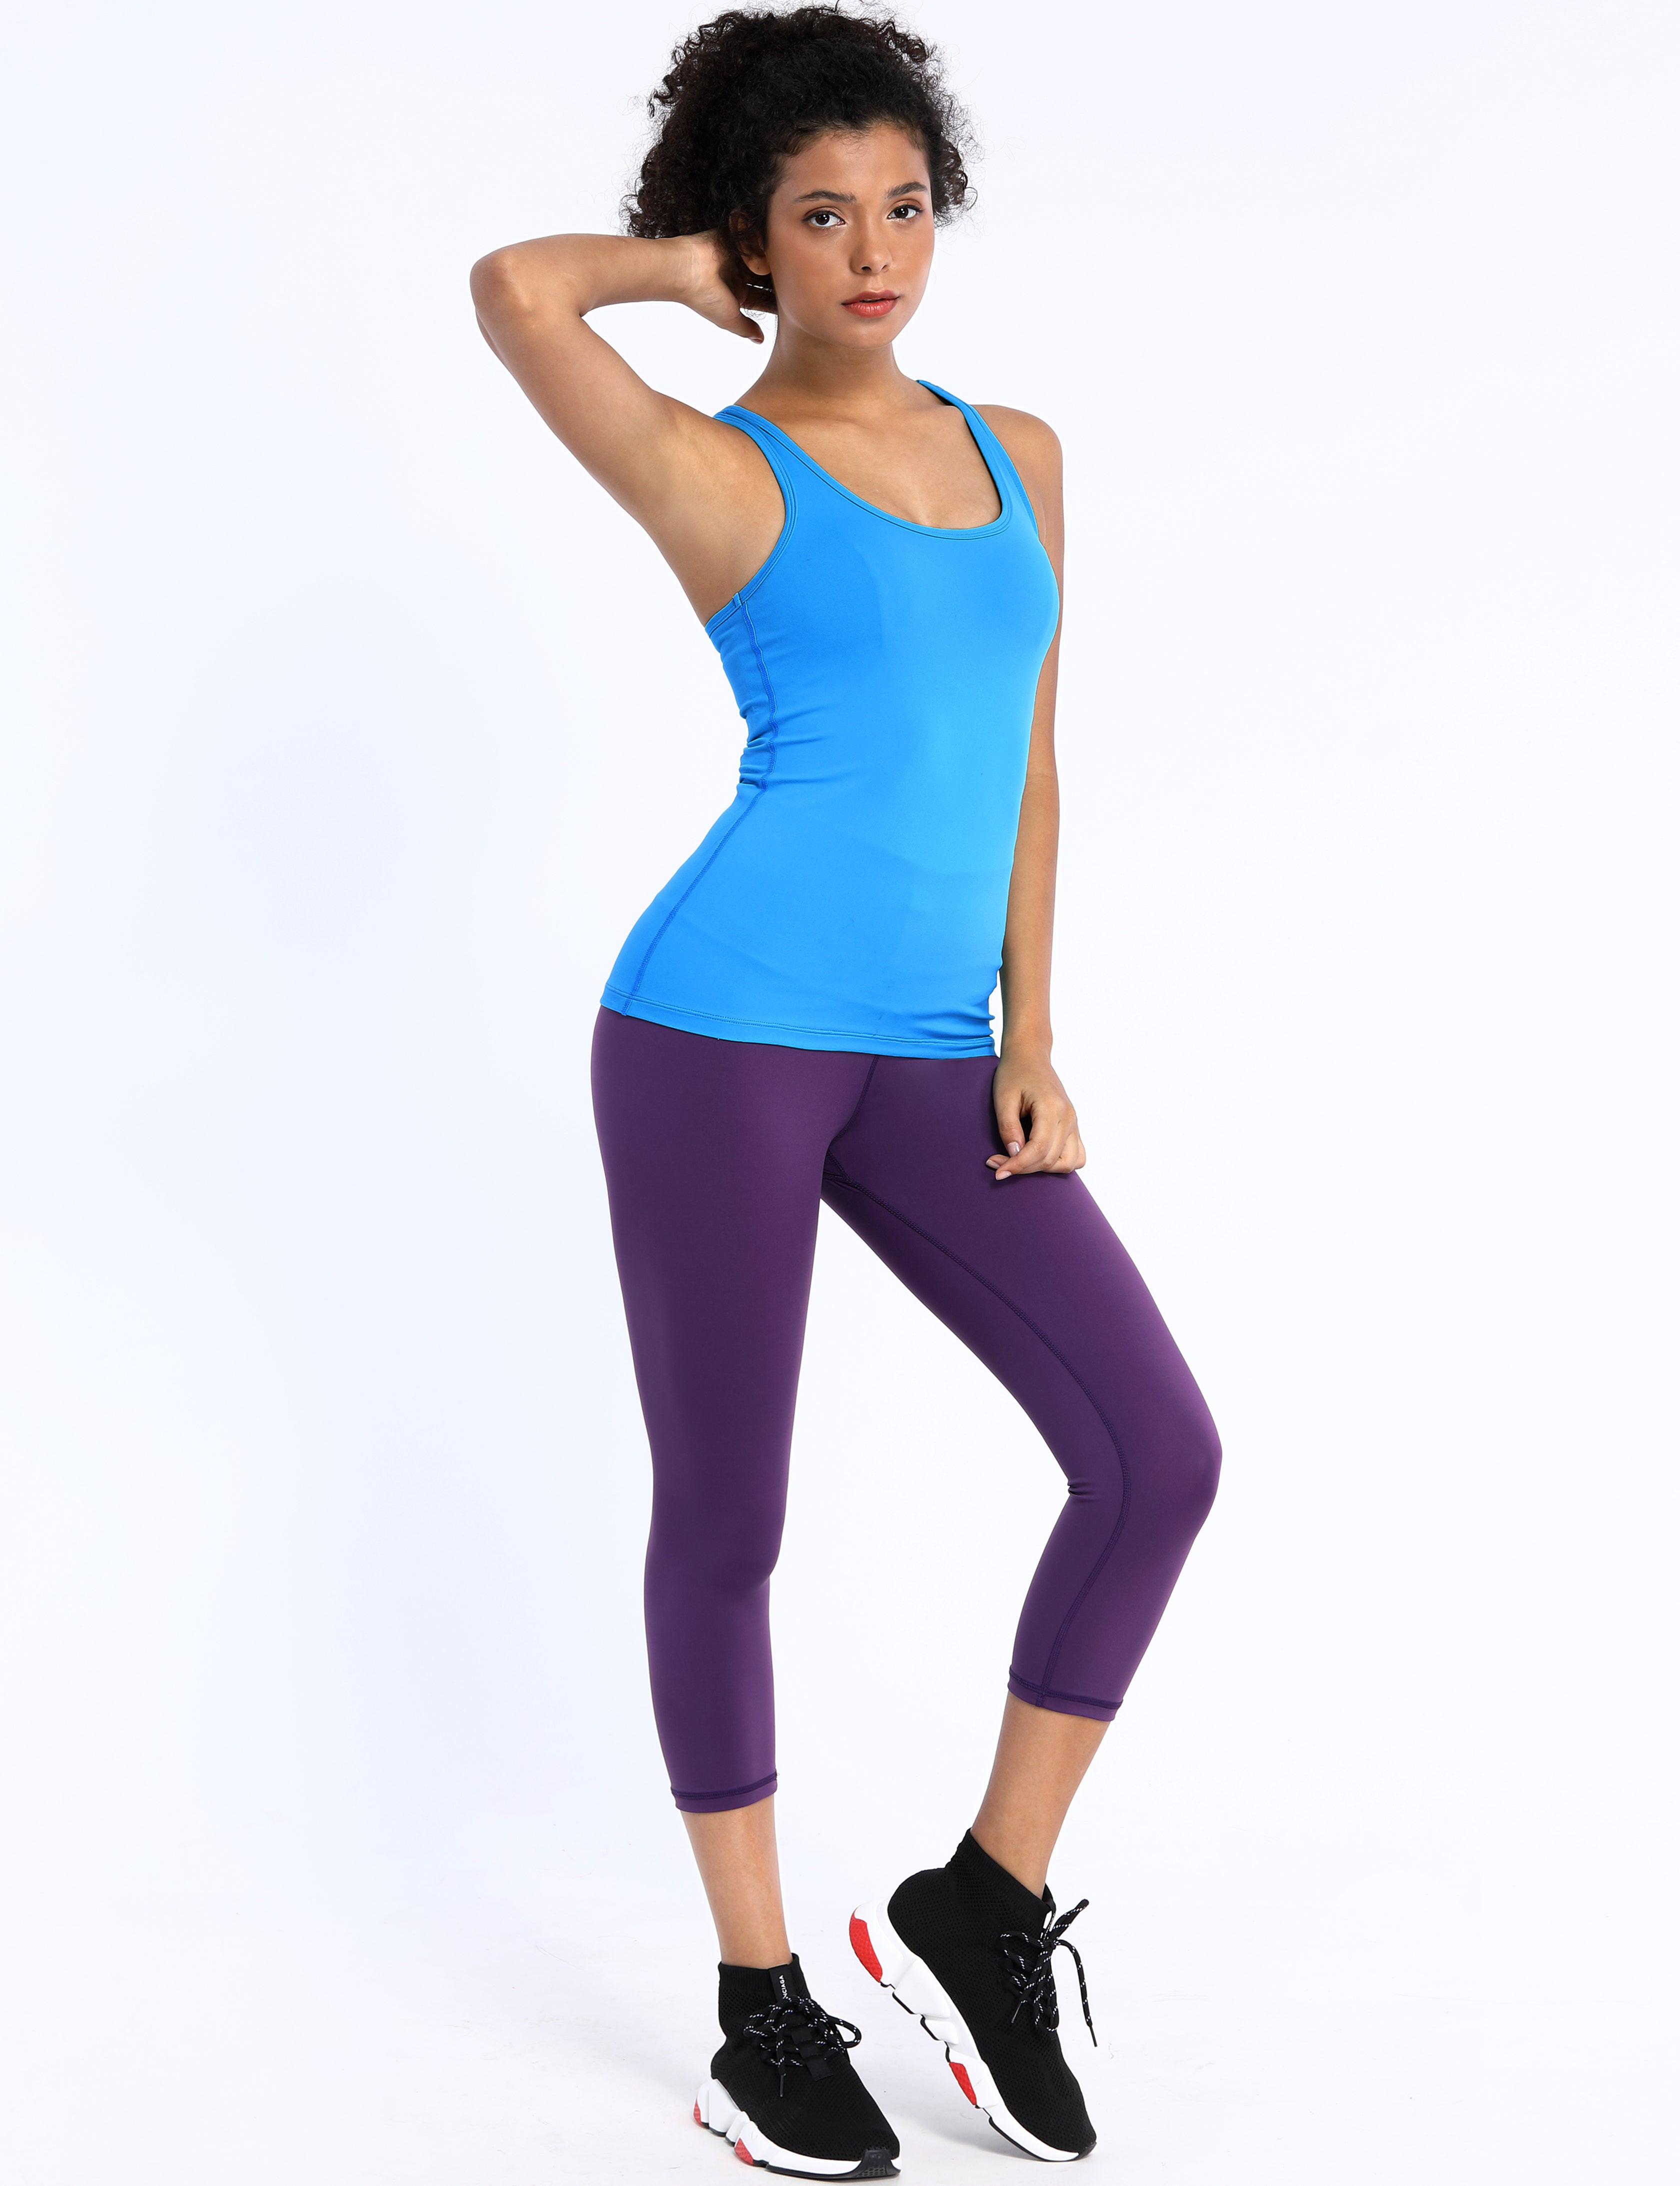 Racerback Athletic Tank Tops electricblue 92%Nylon/8%Spandex(Cotton Soft) Designed for Pilates Tight Fit So buttery soft, it feels weightless Sweat-wicking Four-way stretch Breathable Contours your body Sits below the waistband for moderate, everyday coverage